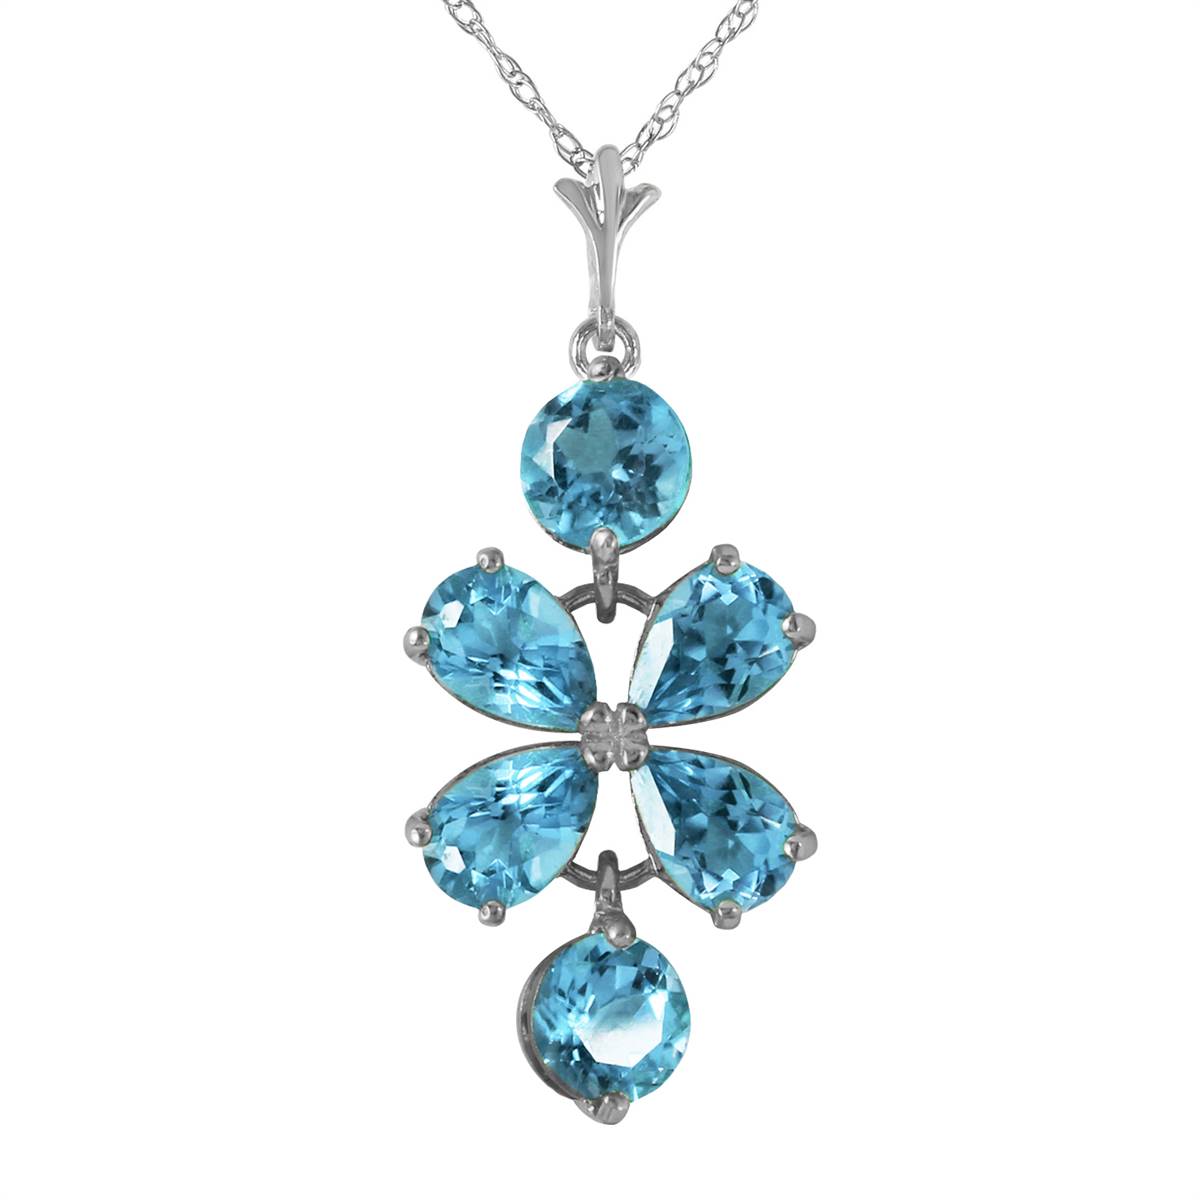 3.15 Carat 14K Solid White Gold Dare To Dream Blue Topaz Necklace